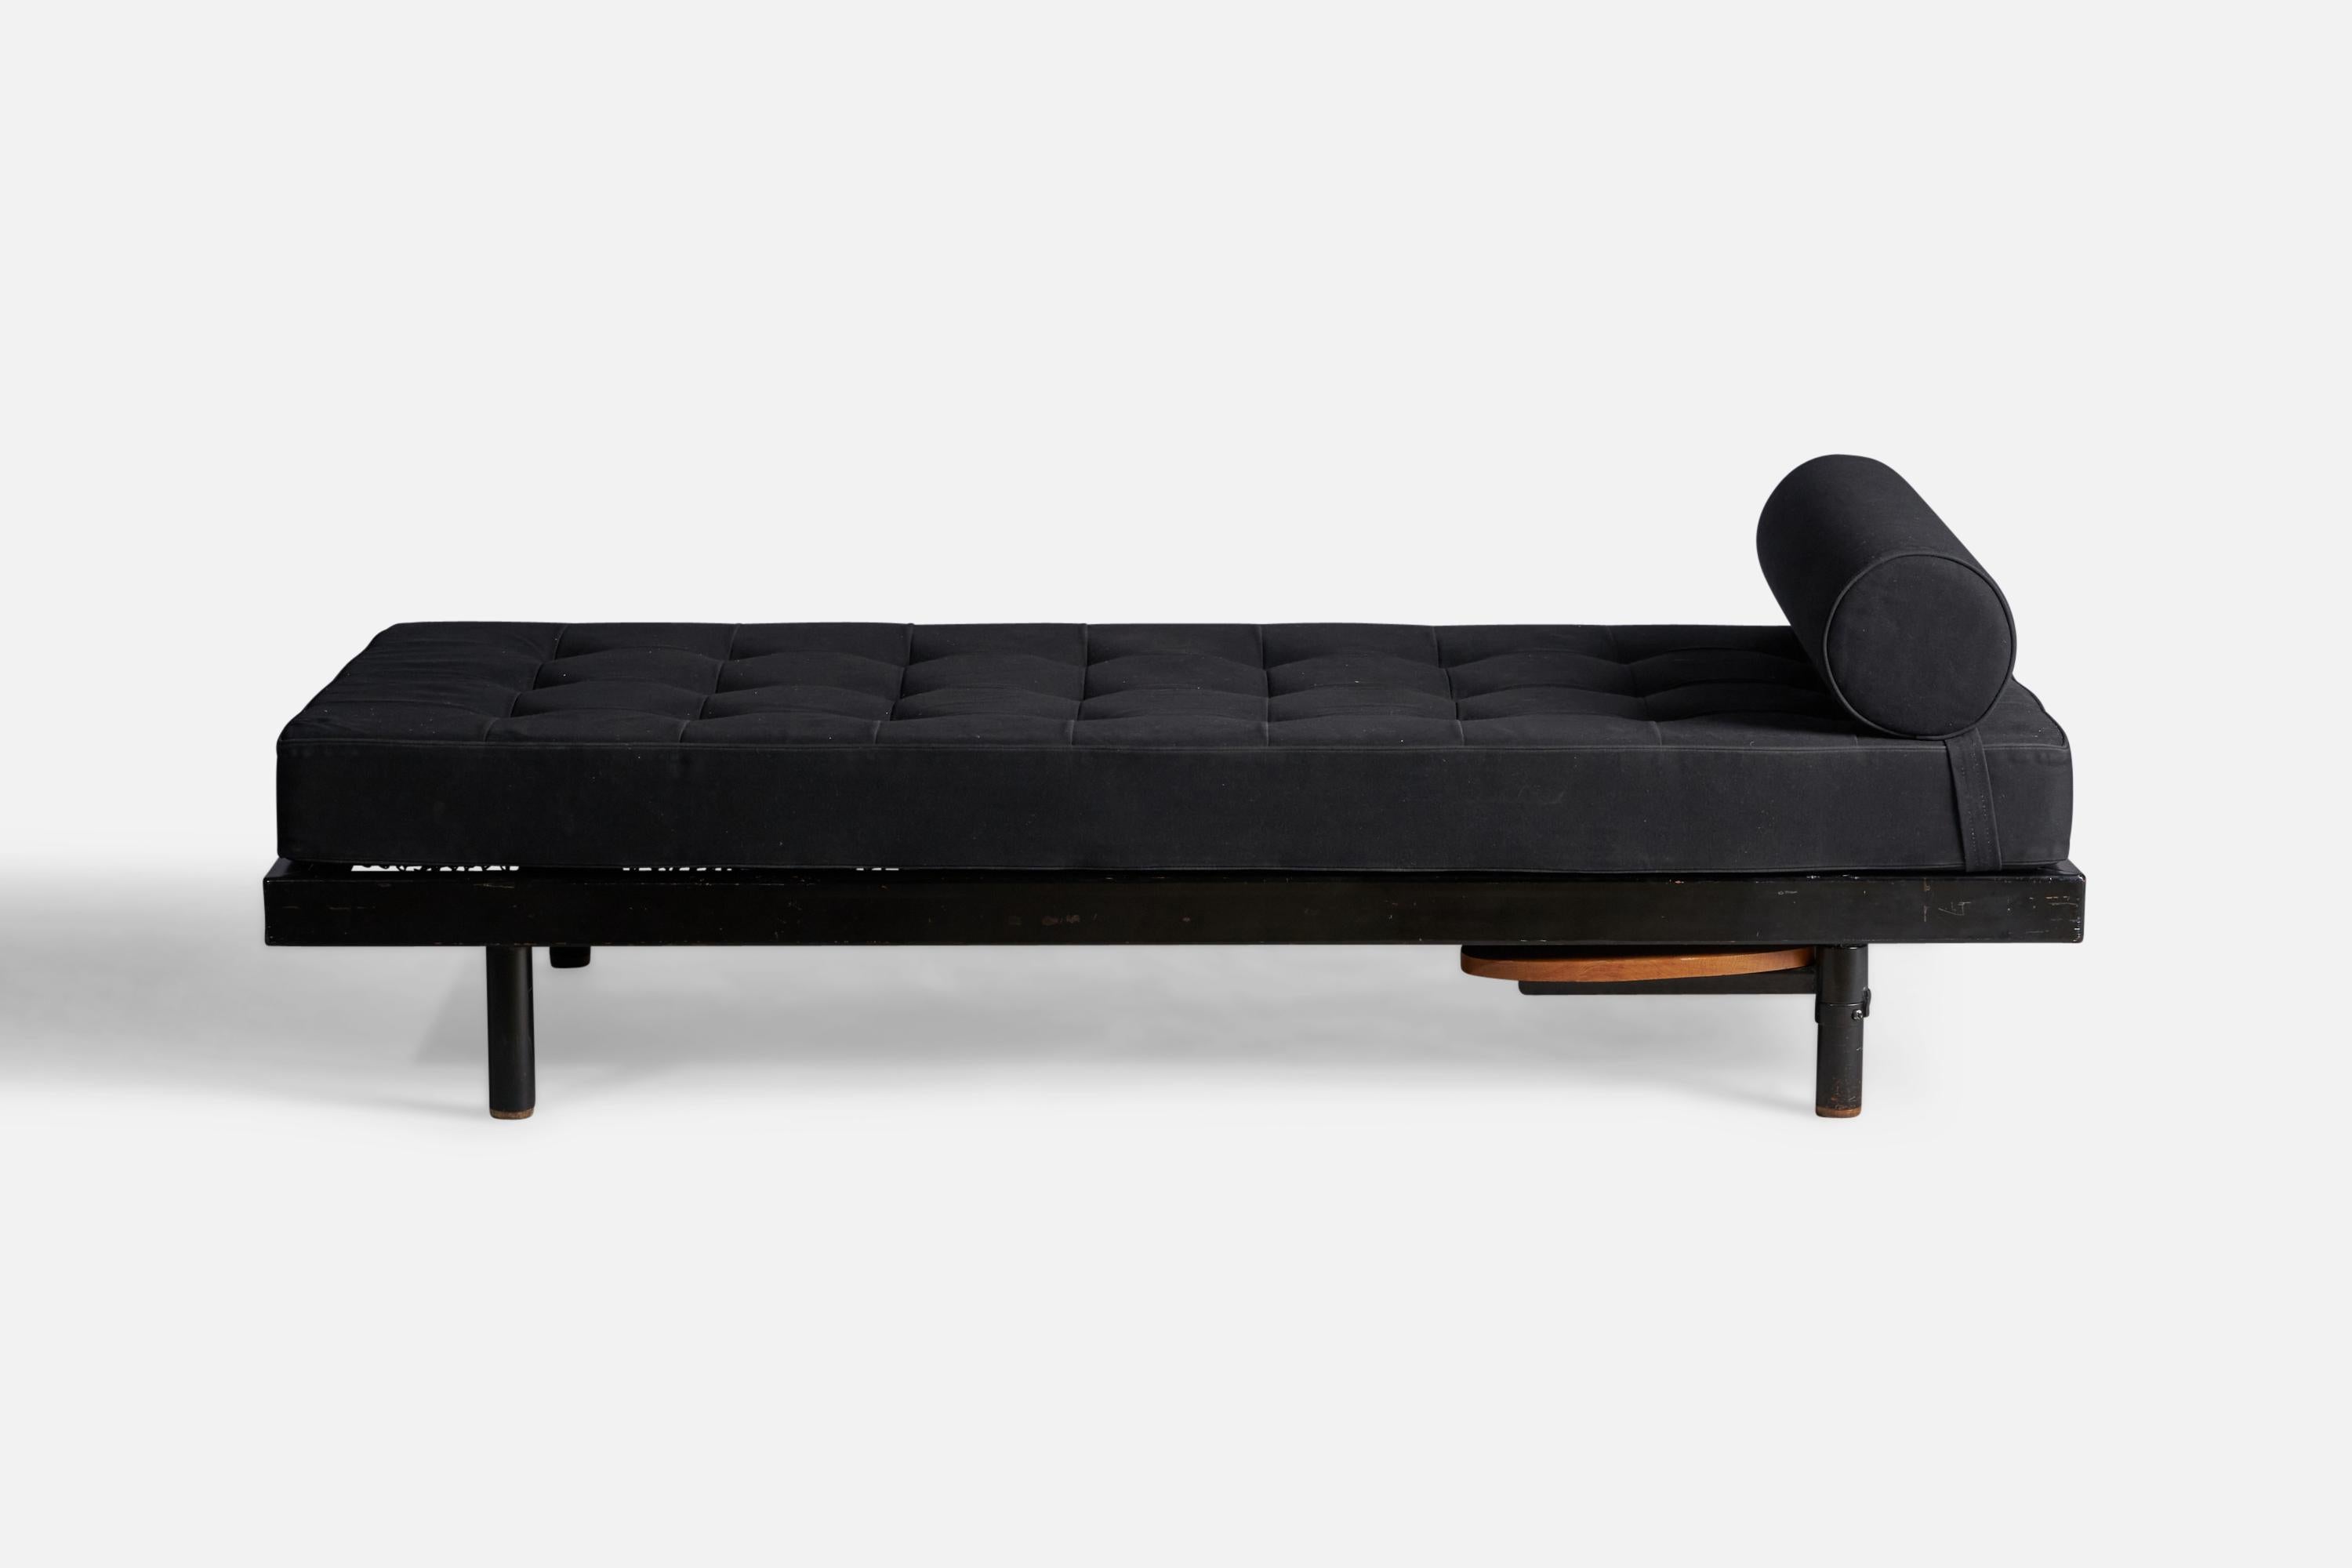 A black-lacquered metal, black fabric and oak daybed, designed by Jean Prouvé and produced by Ateliers Prouve, France, 1950s.

Side table adds 14.25